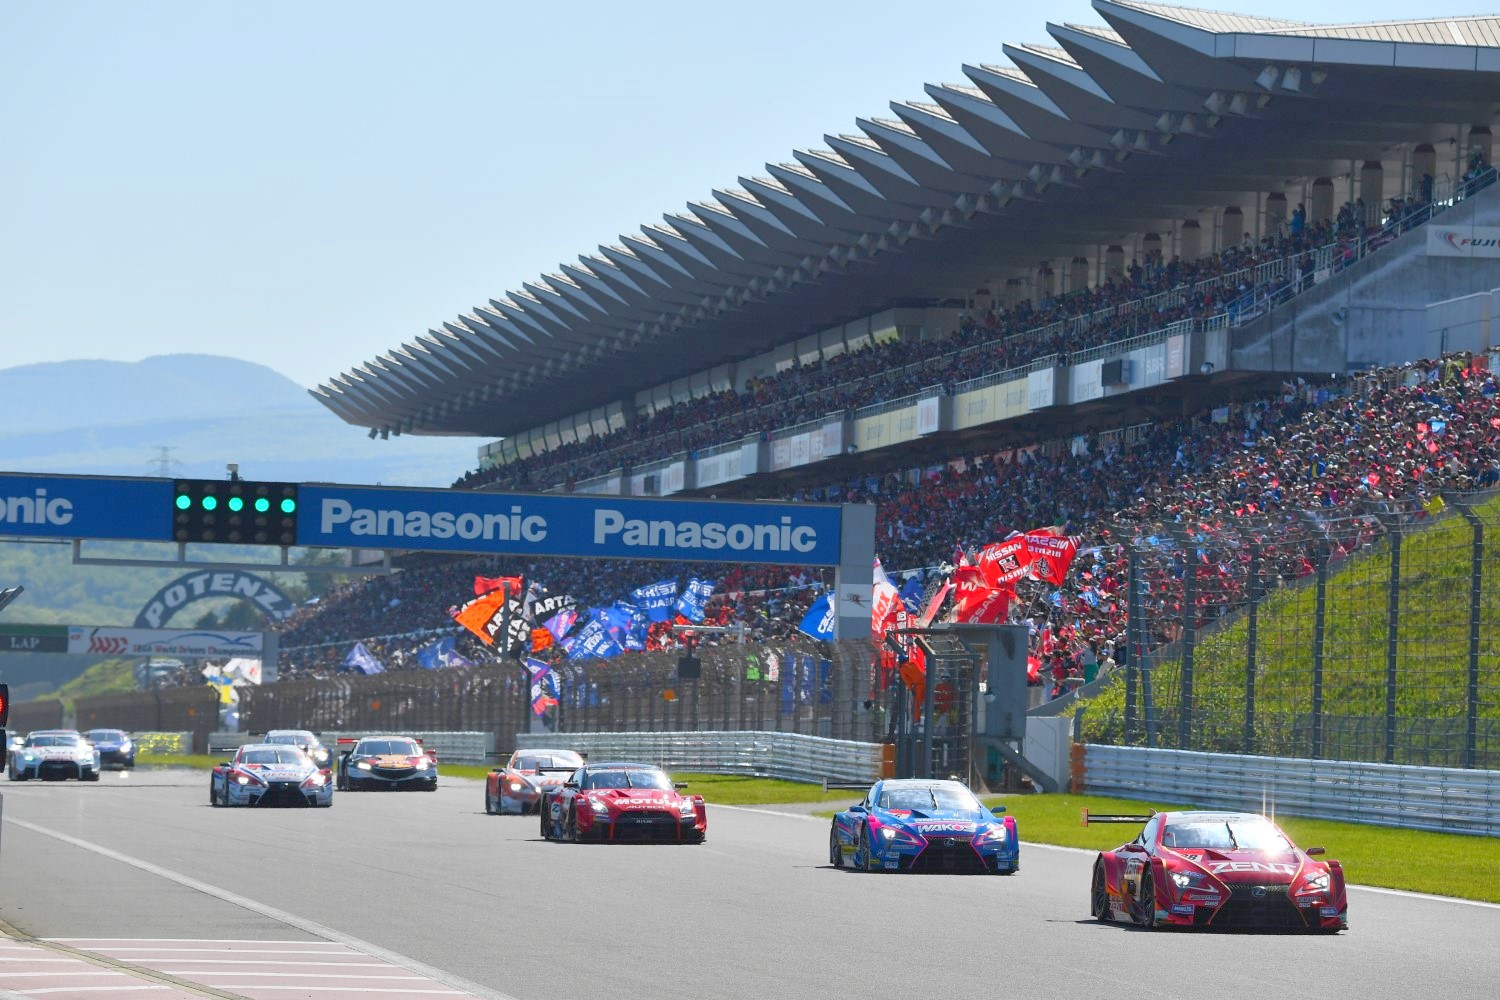 Super GT race at Fuji. Note the packed grandstands